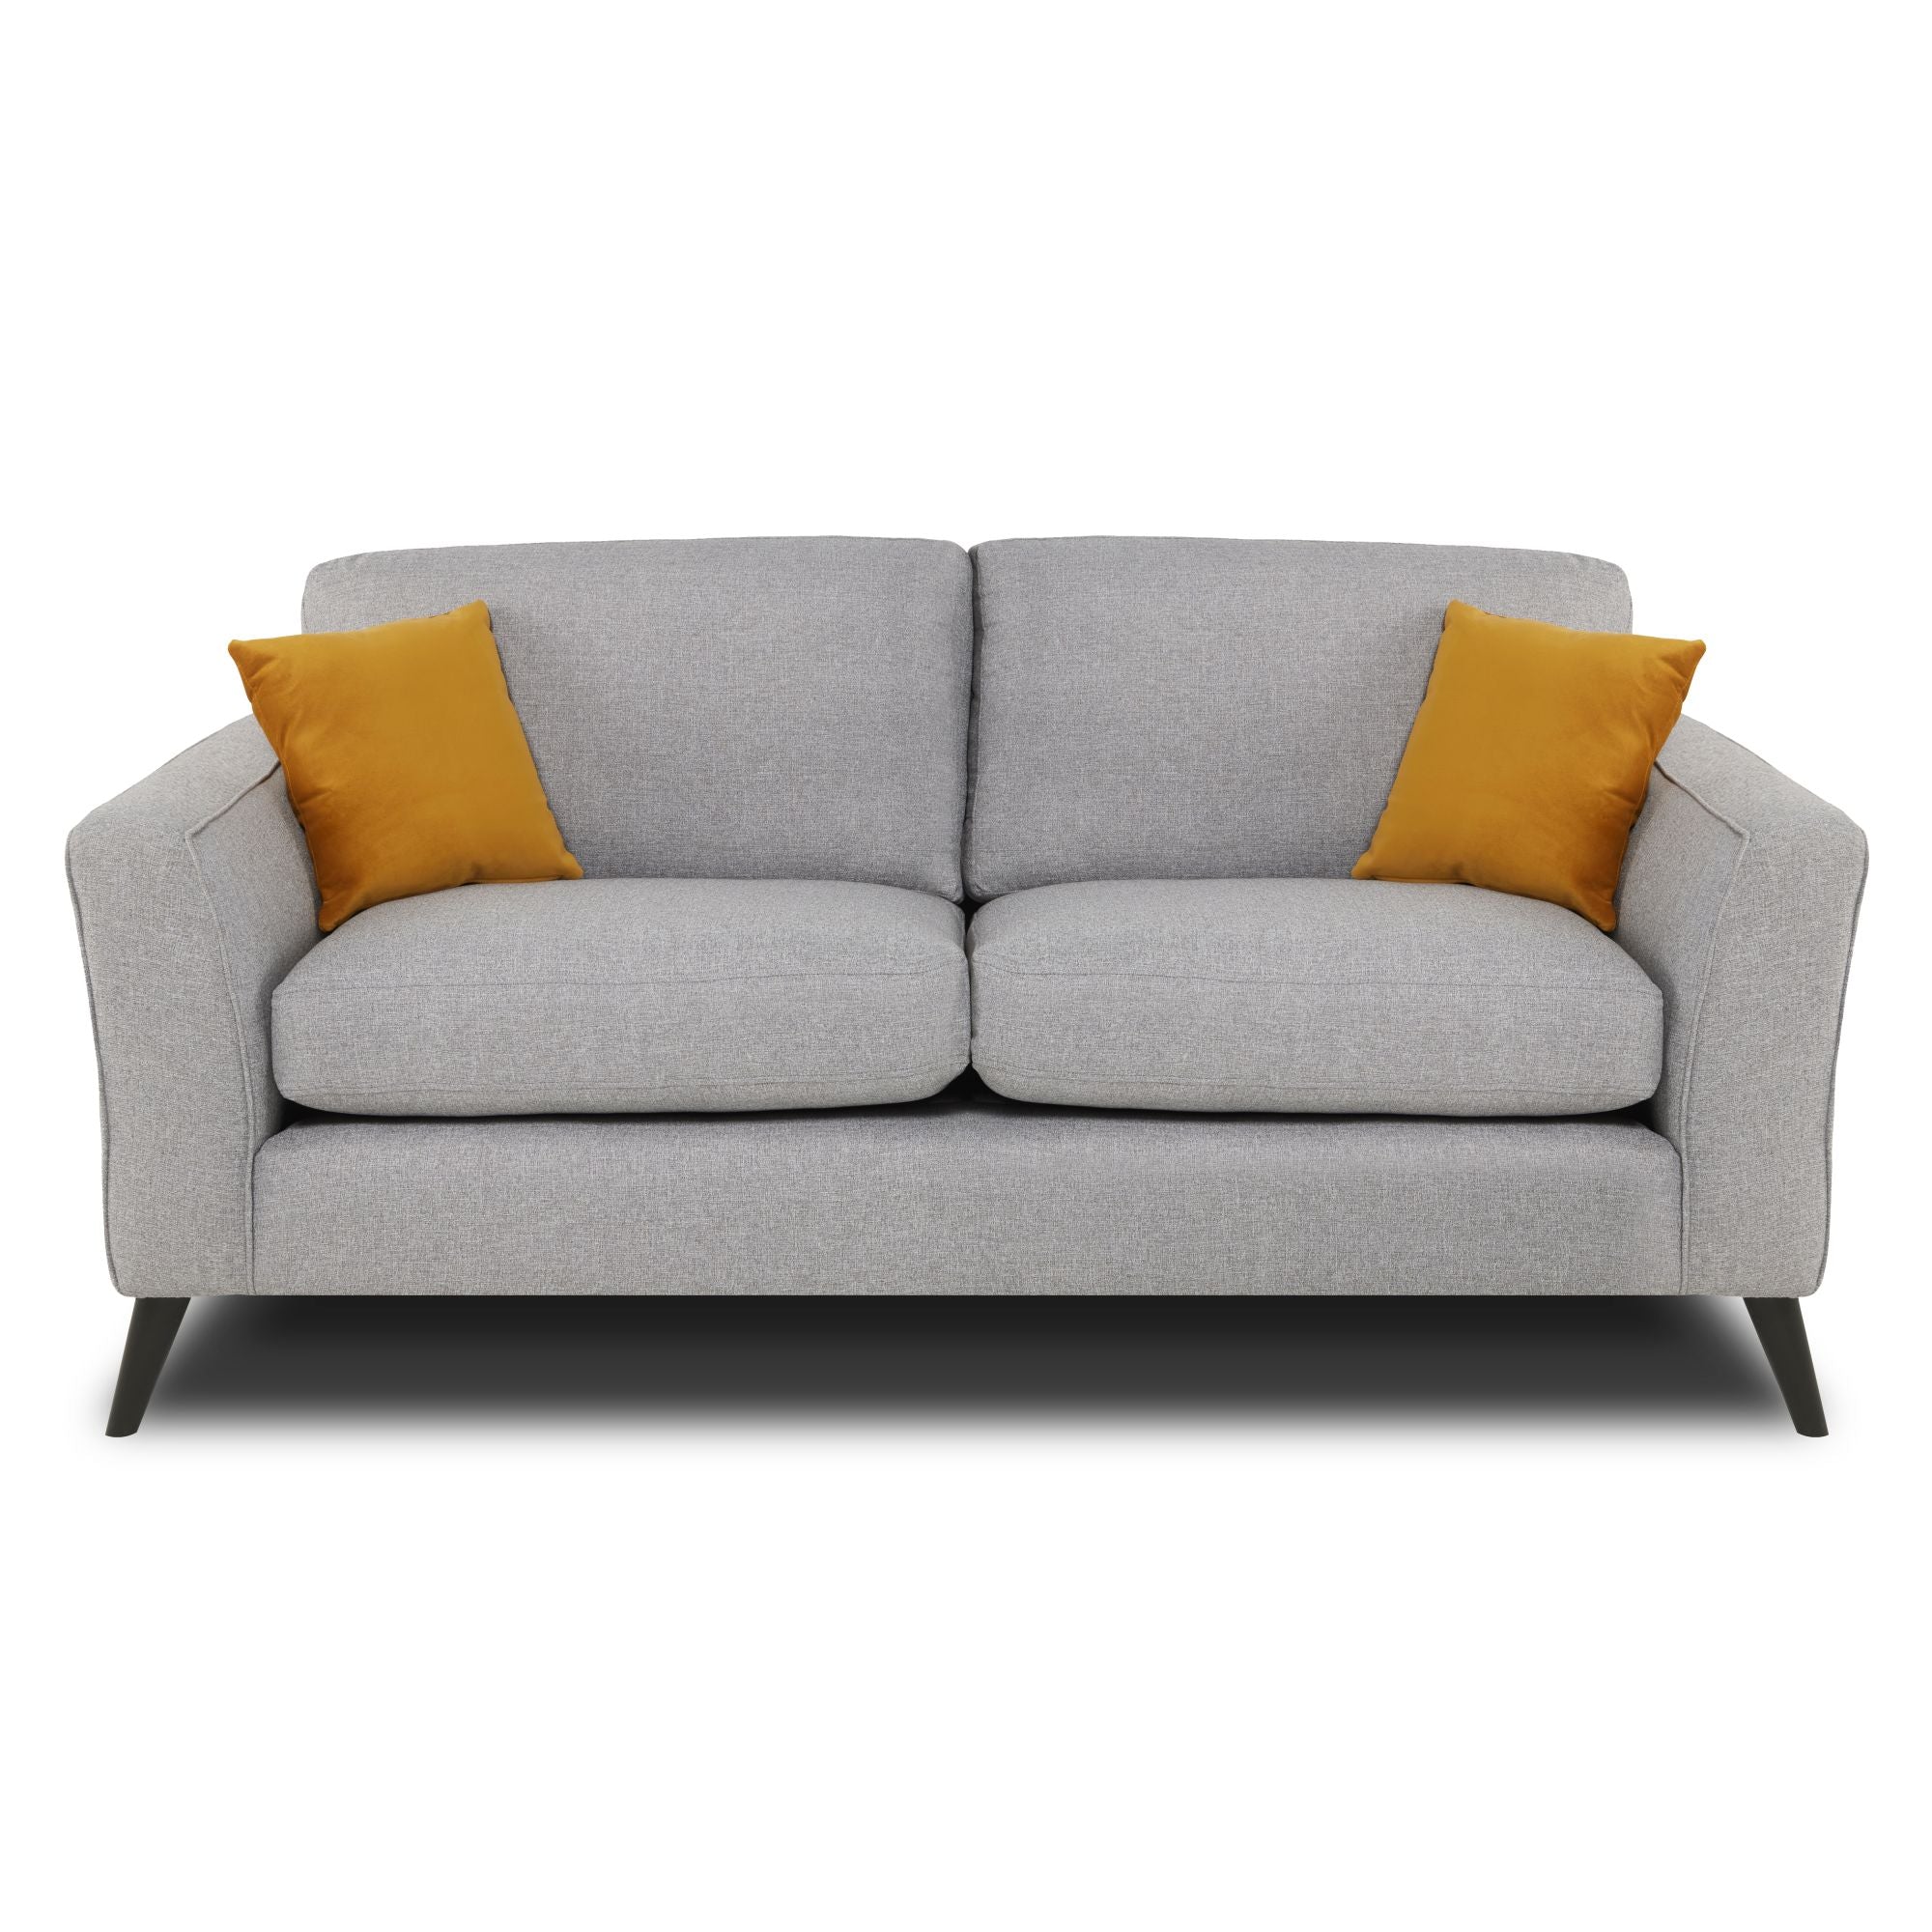 Libby 3 seater sofa in silver front facing on a white background 